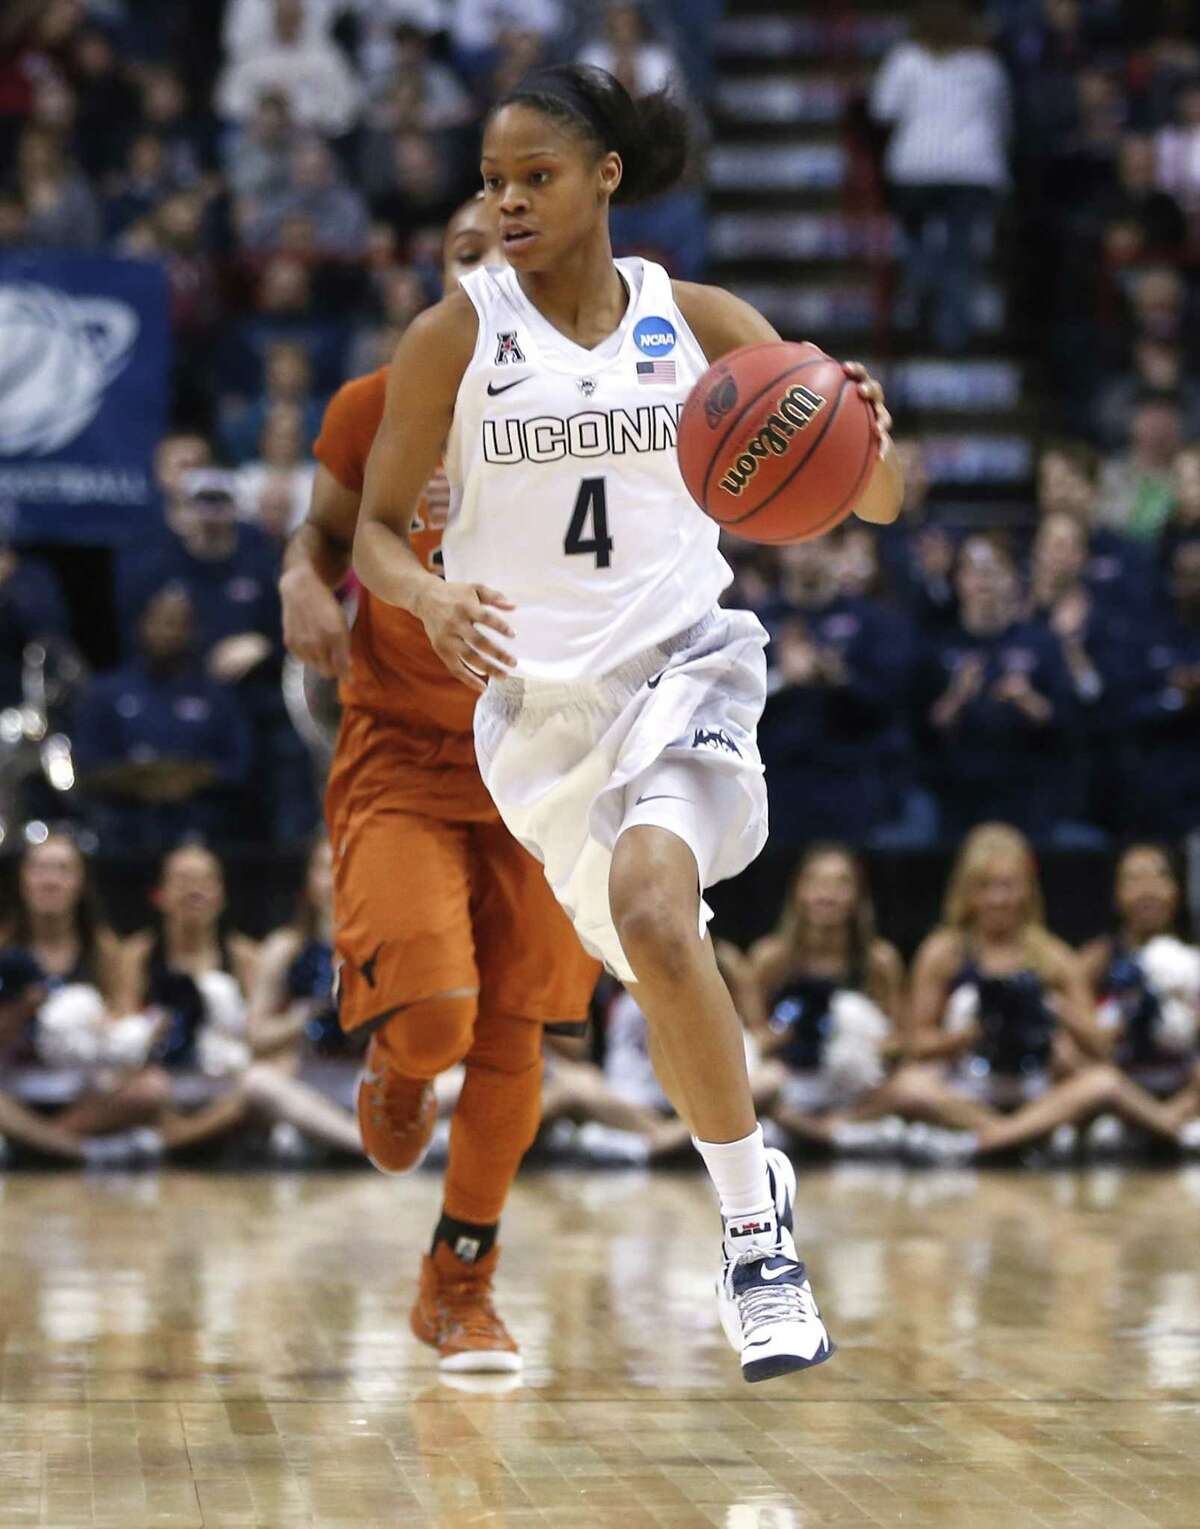 Connecticut guard Moriah Jefferson (4) moves the ball against Texas during the first half of a women's college basketball regional semifinal game in the NCAA Tournament on Saturday, March 28, 2015, in Albany, N.Y. (AP Photo/Mike Groll)